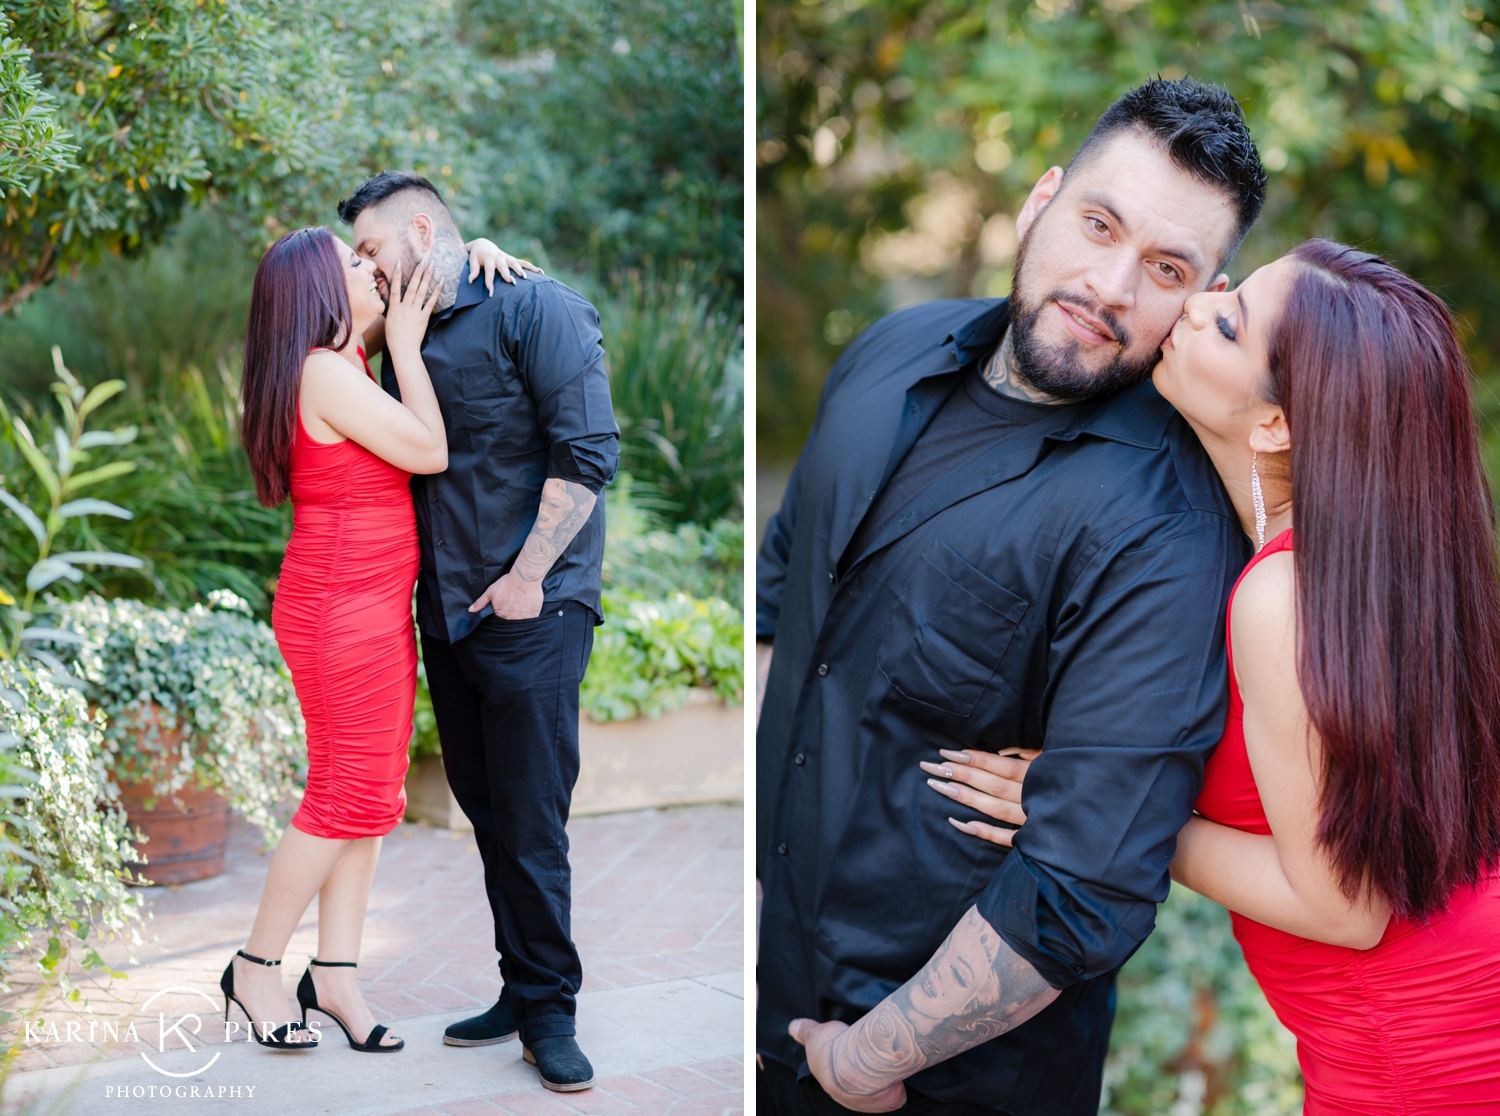 Los Angeles wedding and engagement photography by Karina Pires Photography